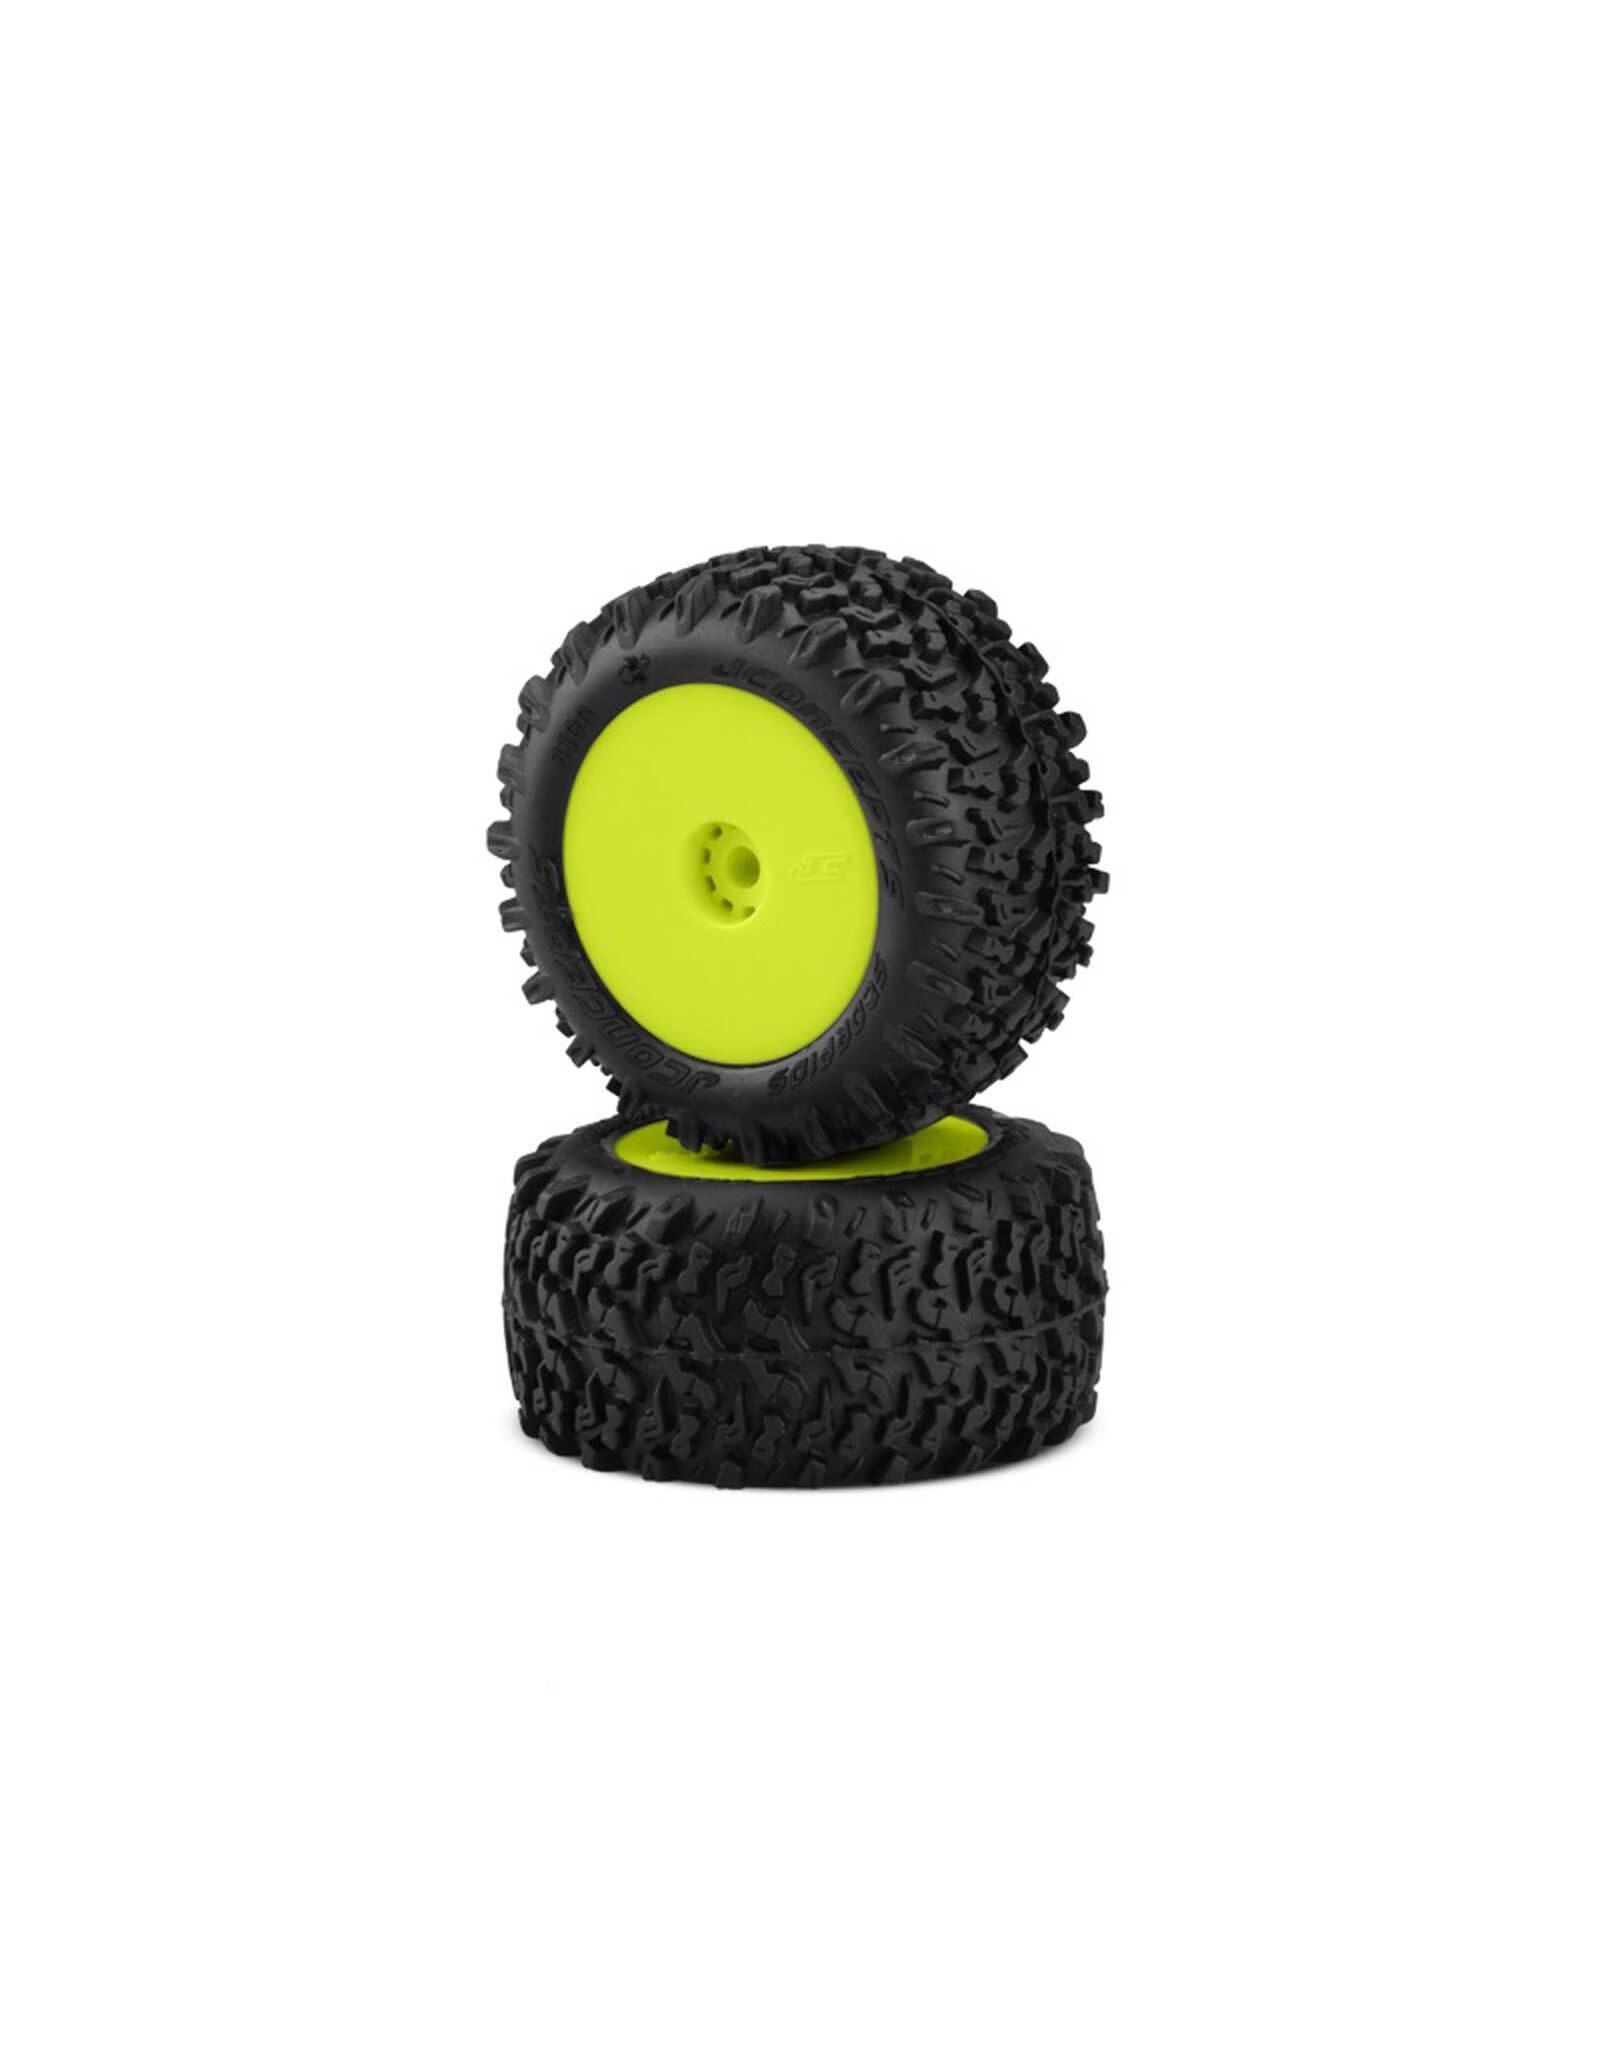 jconcepts Scorpios Tires, Mounted Yellow Wheels, Green Compound (2): Mini-T/B